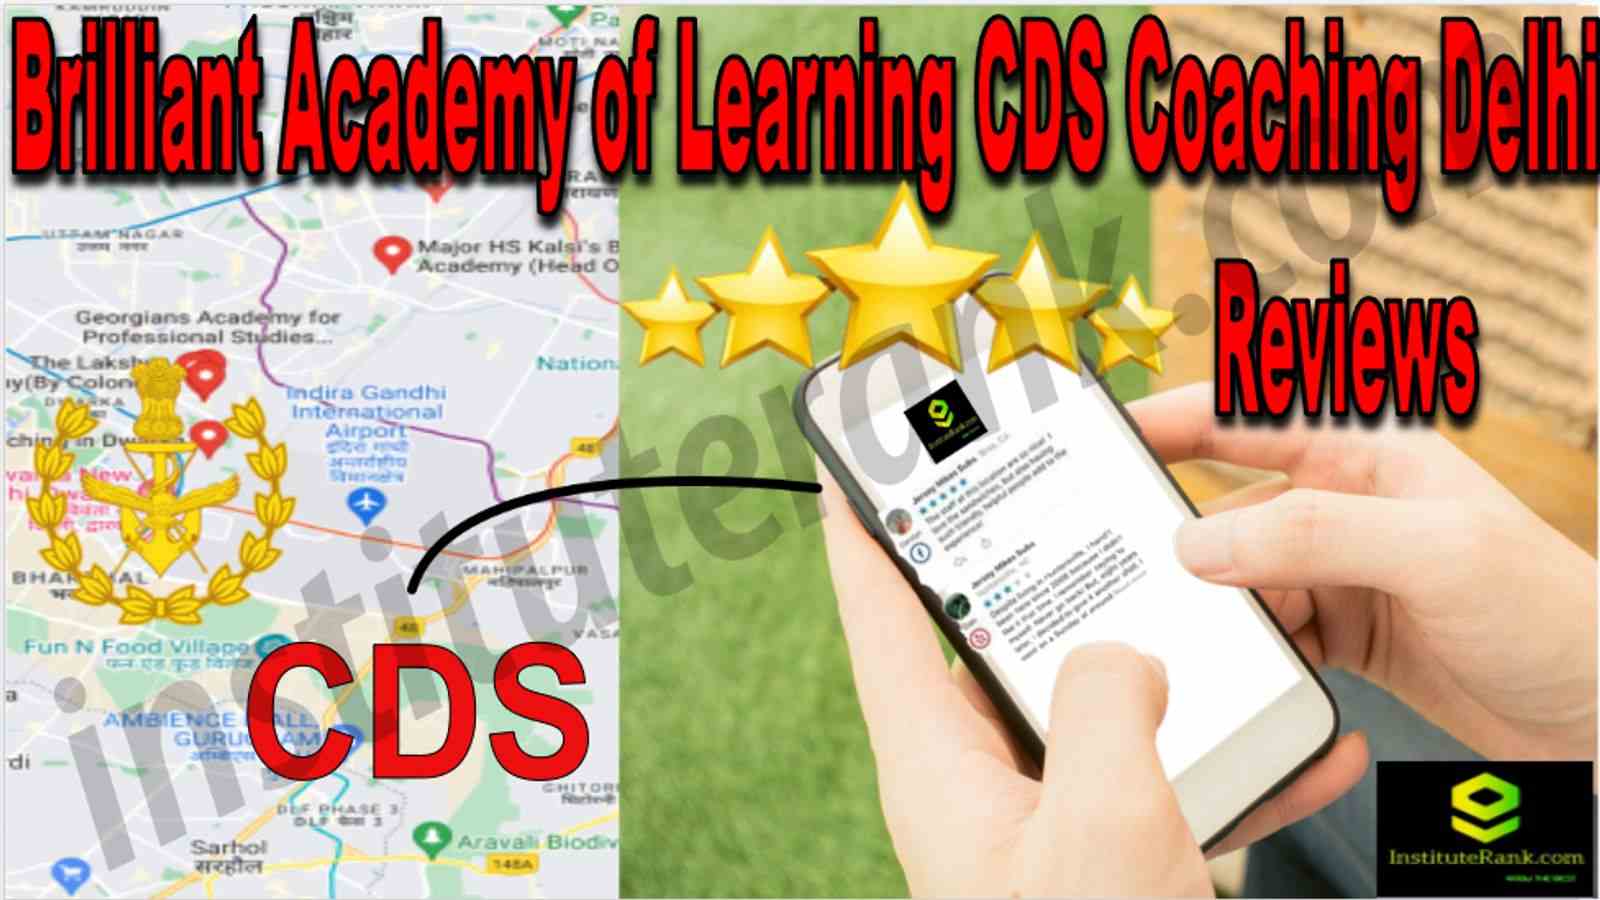 Brilliant Academy of Learning CDS Coaching Delhi Reviews